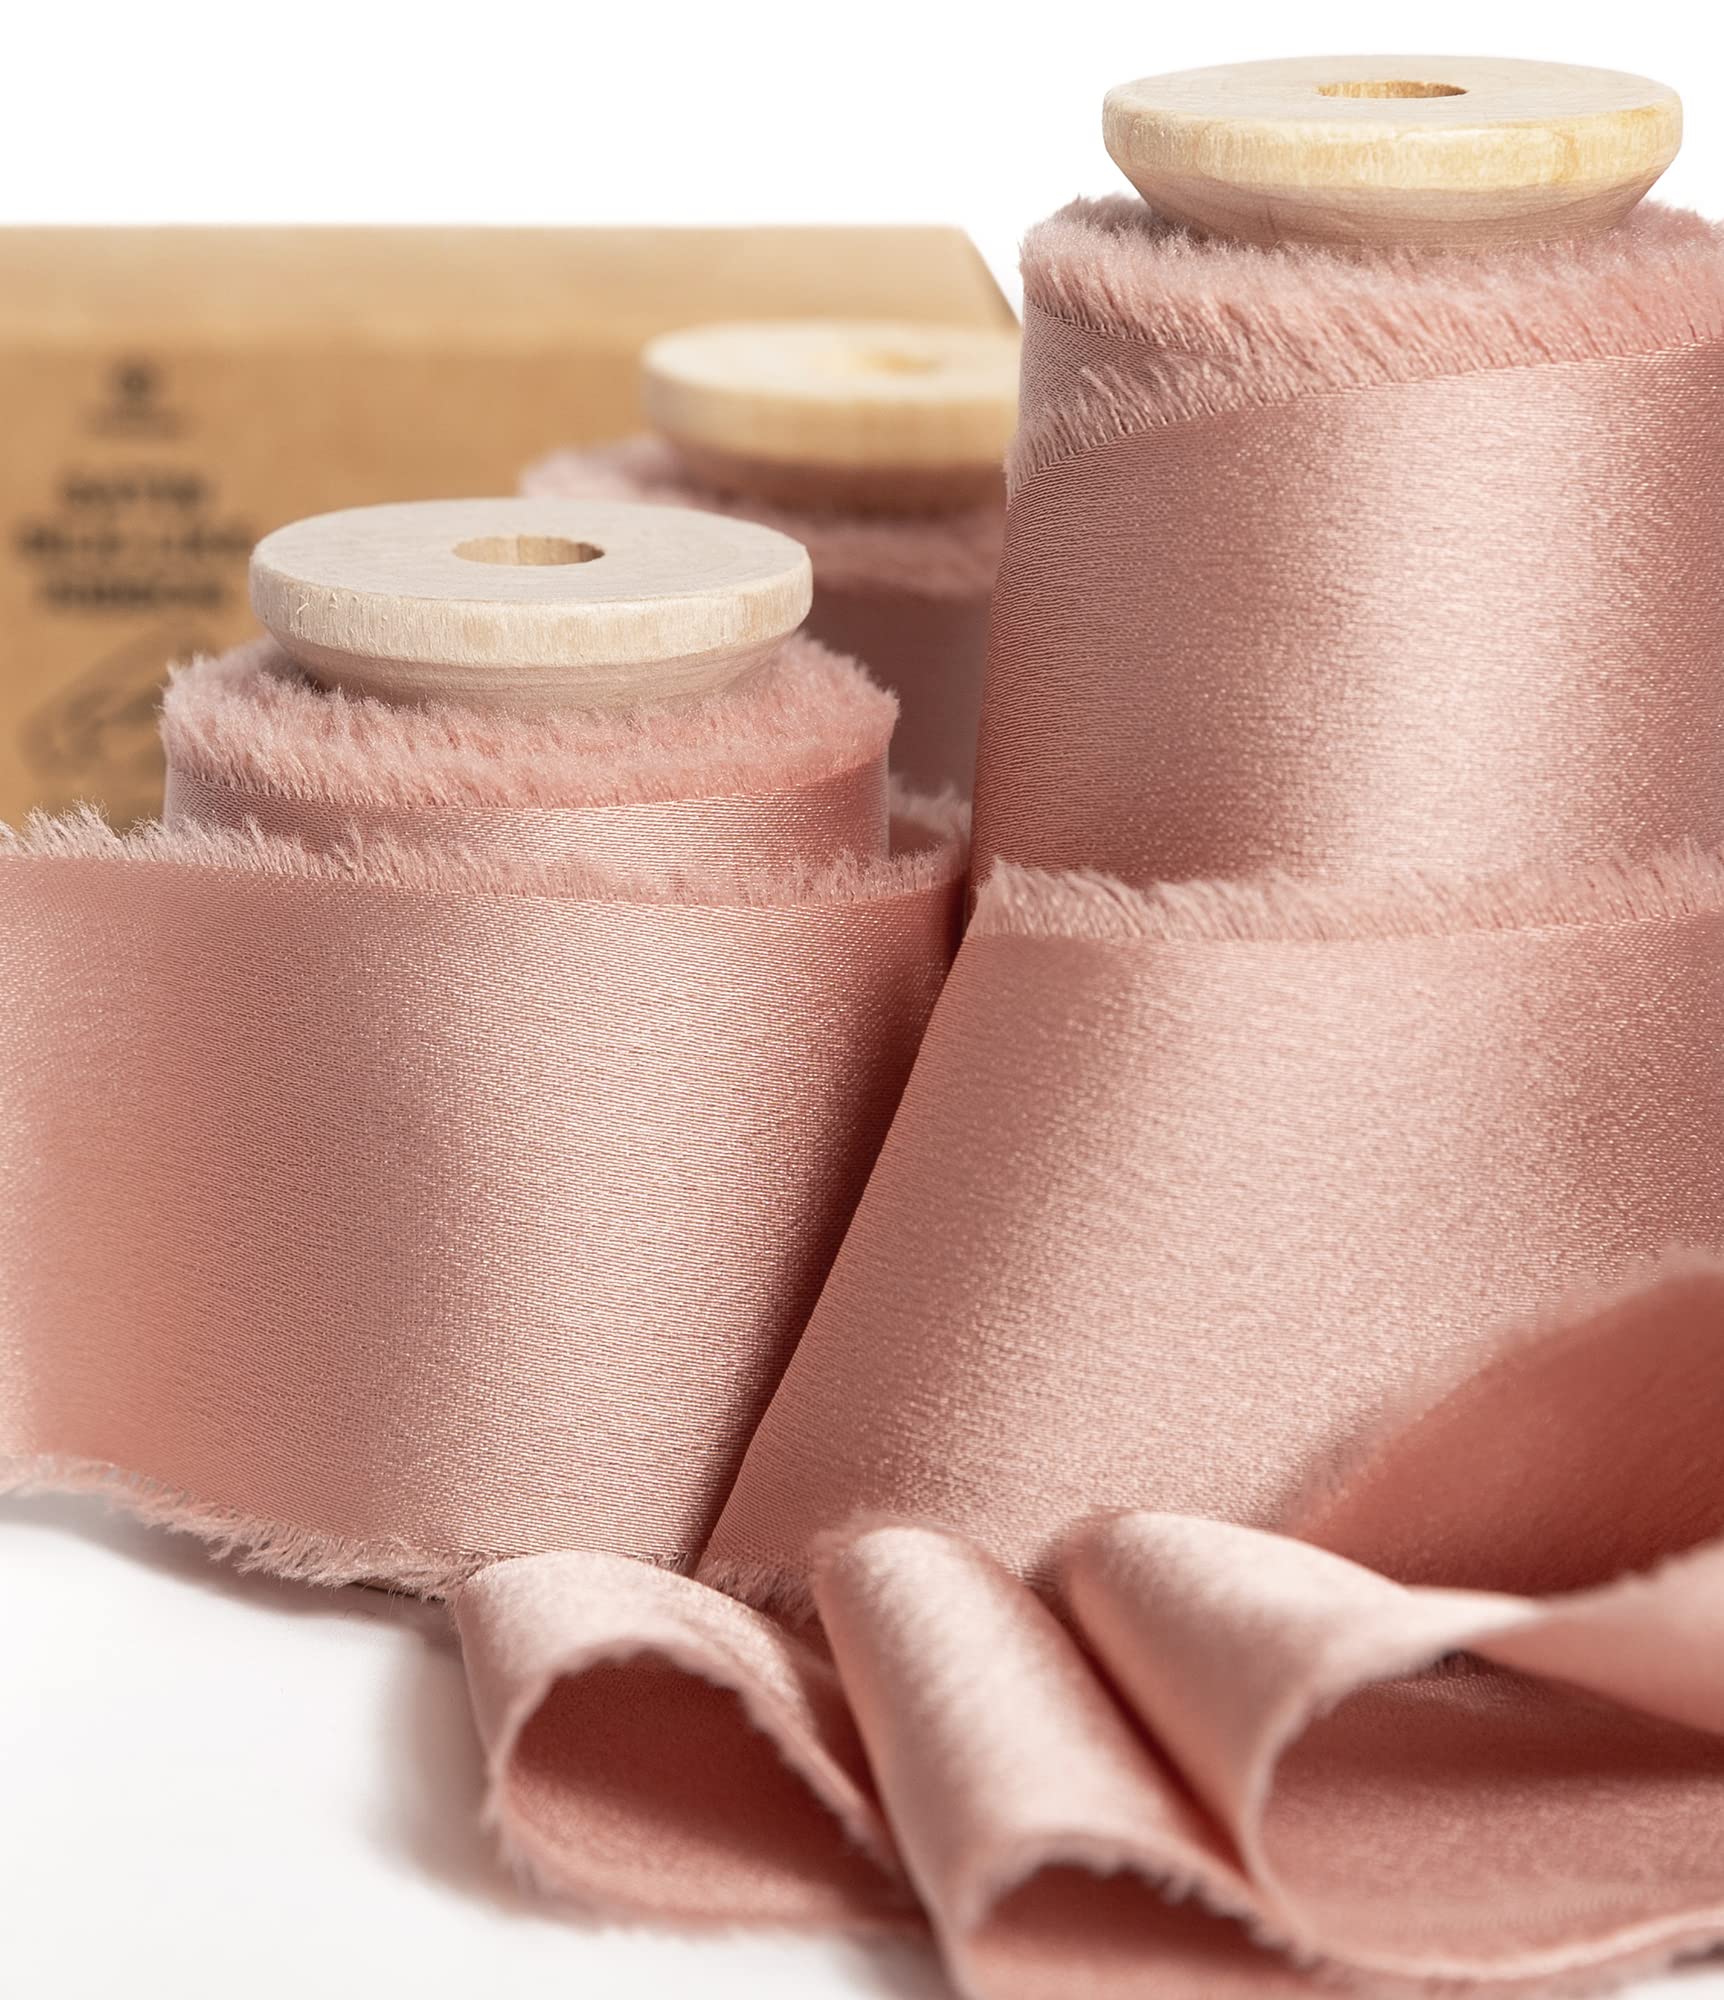 Vitalizart Pink Silk Satin Ribbon 1-1/2 inch x 15 Yard with Wooden Spool  Rose Gold Handmade Frayed Ribbons for Gift Wrapping Baby Shower Wedding  Bridal Bouquets Holiday Decor